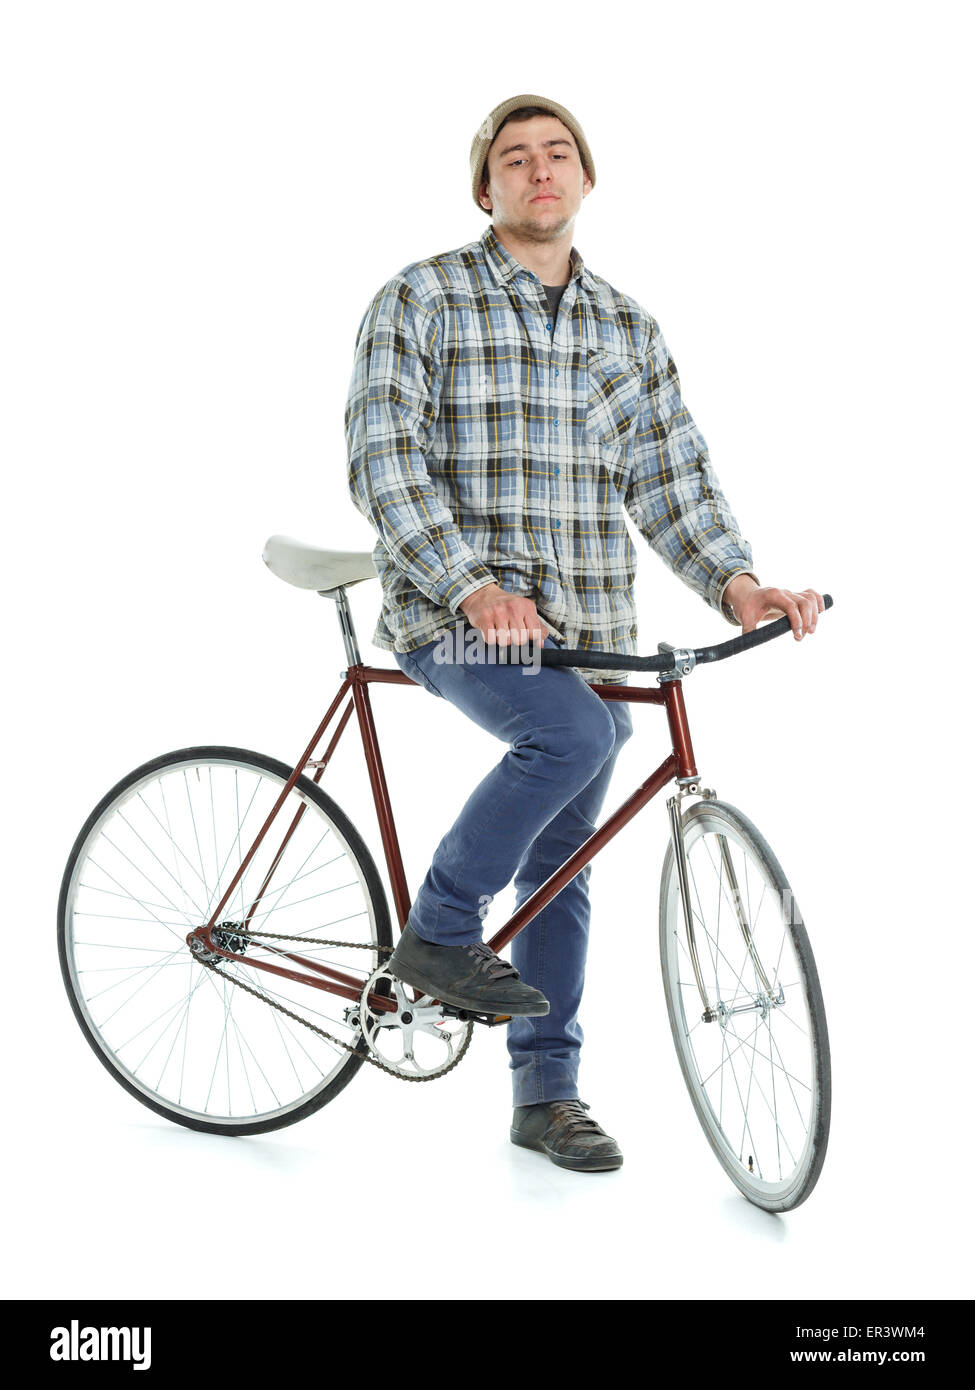 Young man doing tricks on fixed gear bicycle on a white background Stock Photo